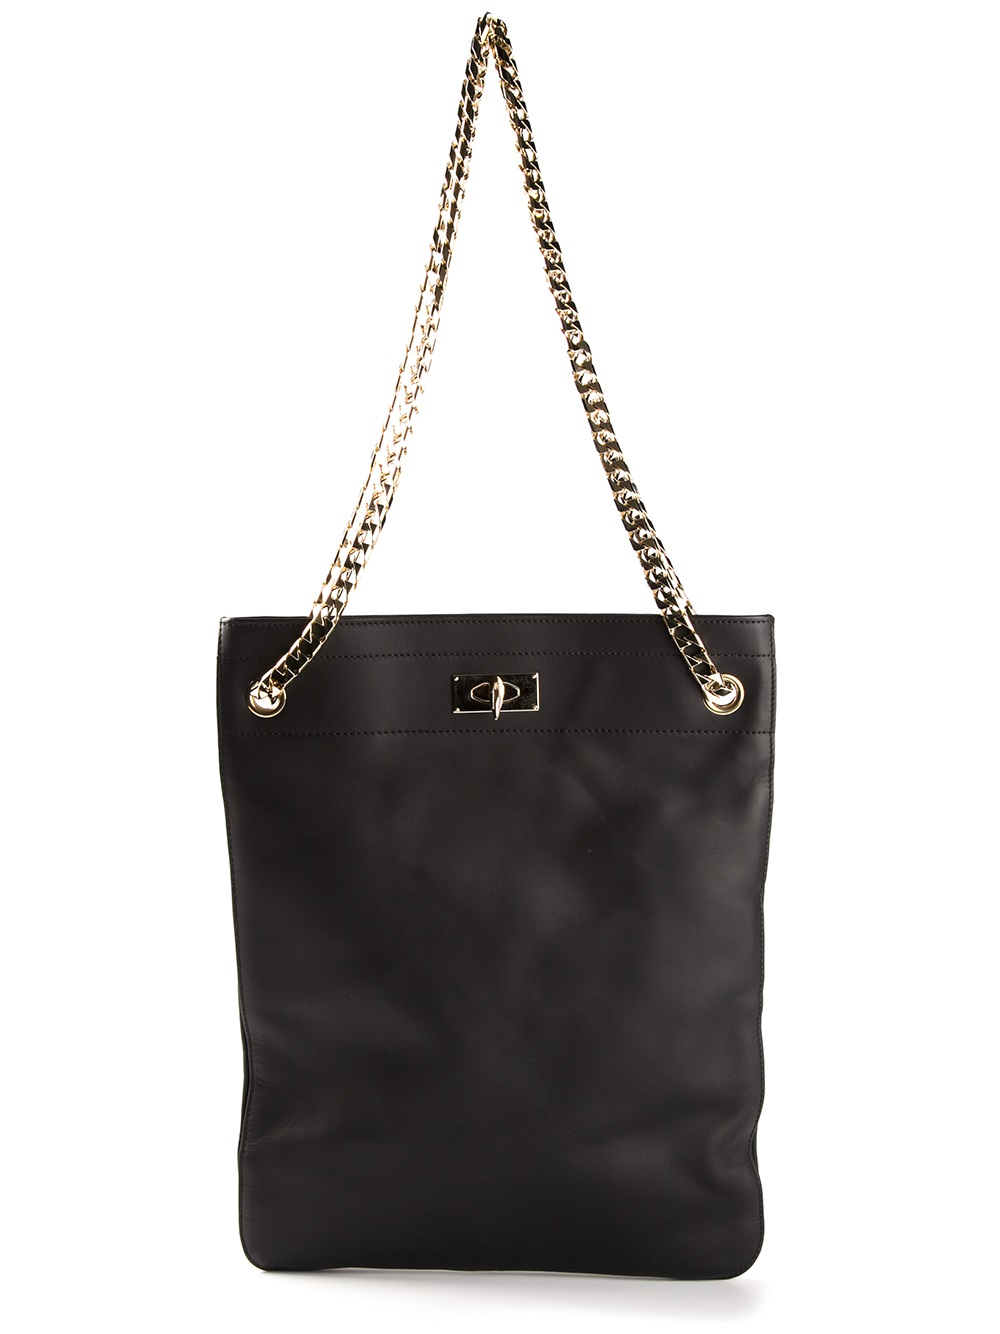 Givenchy Chain Strap Tote Bag in Black - Lyst